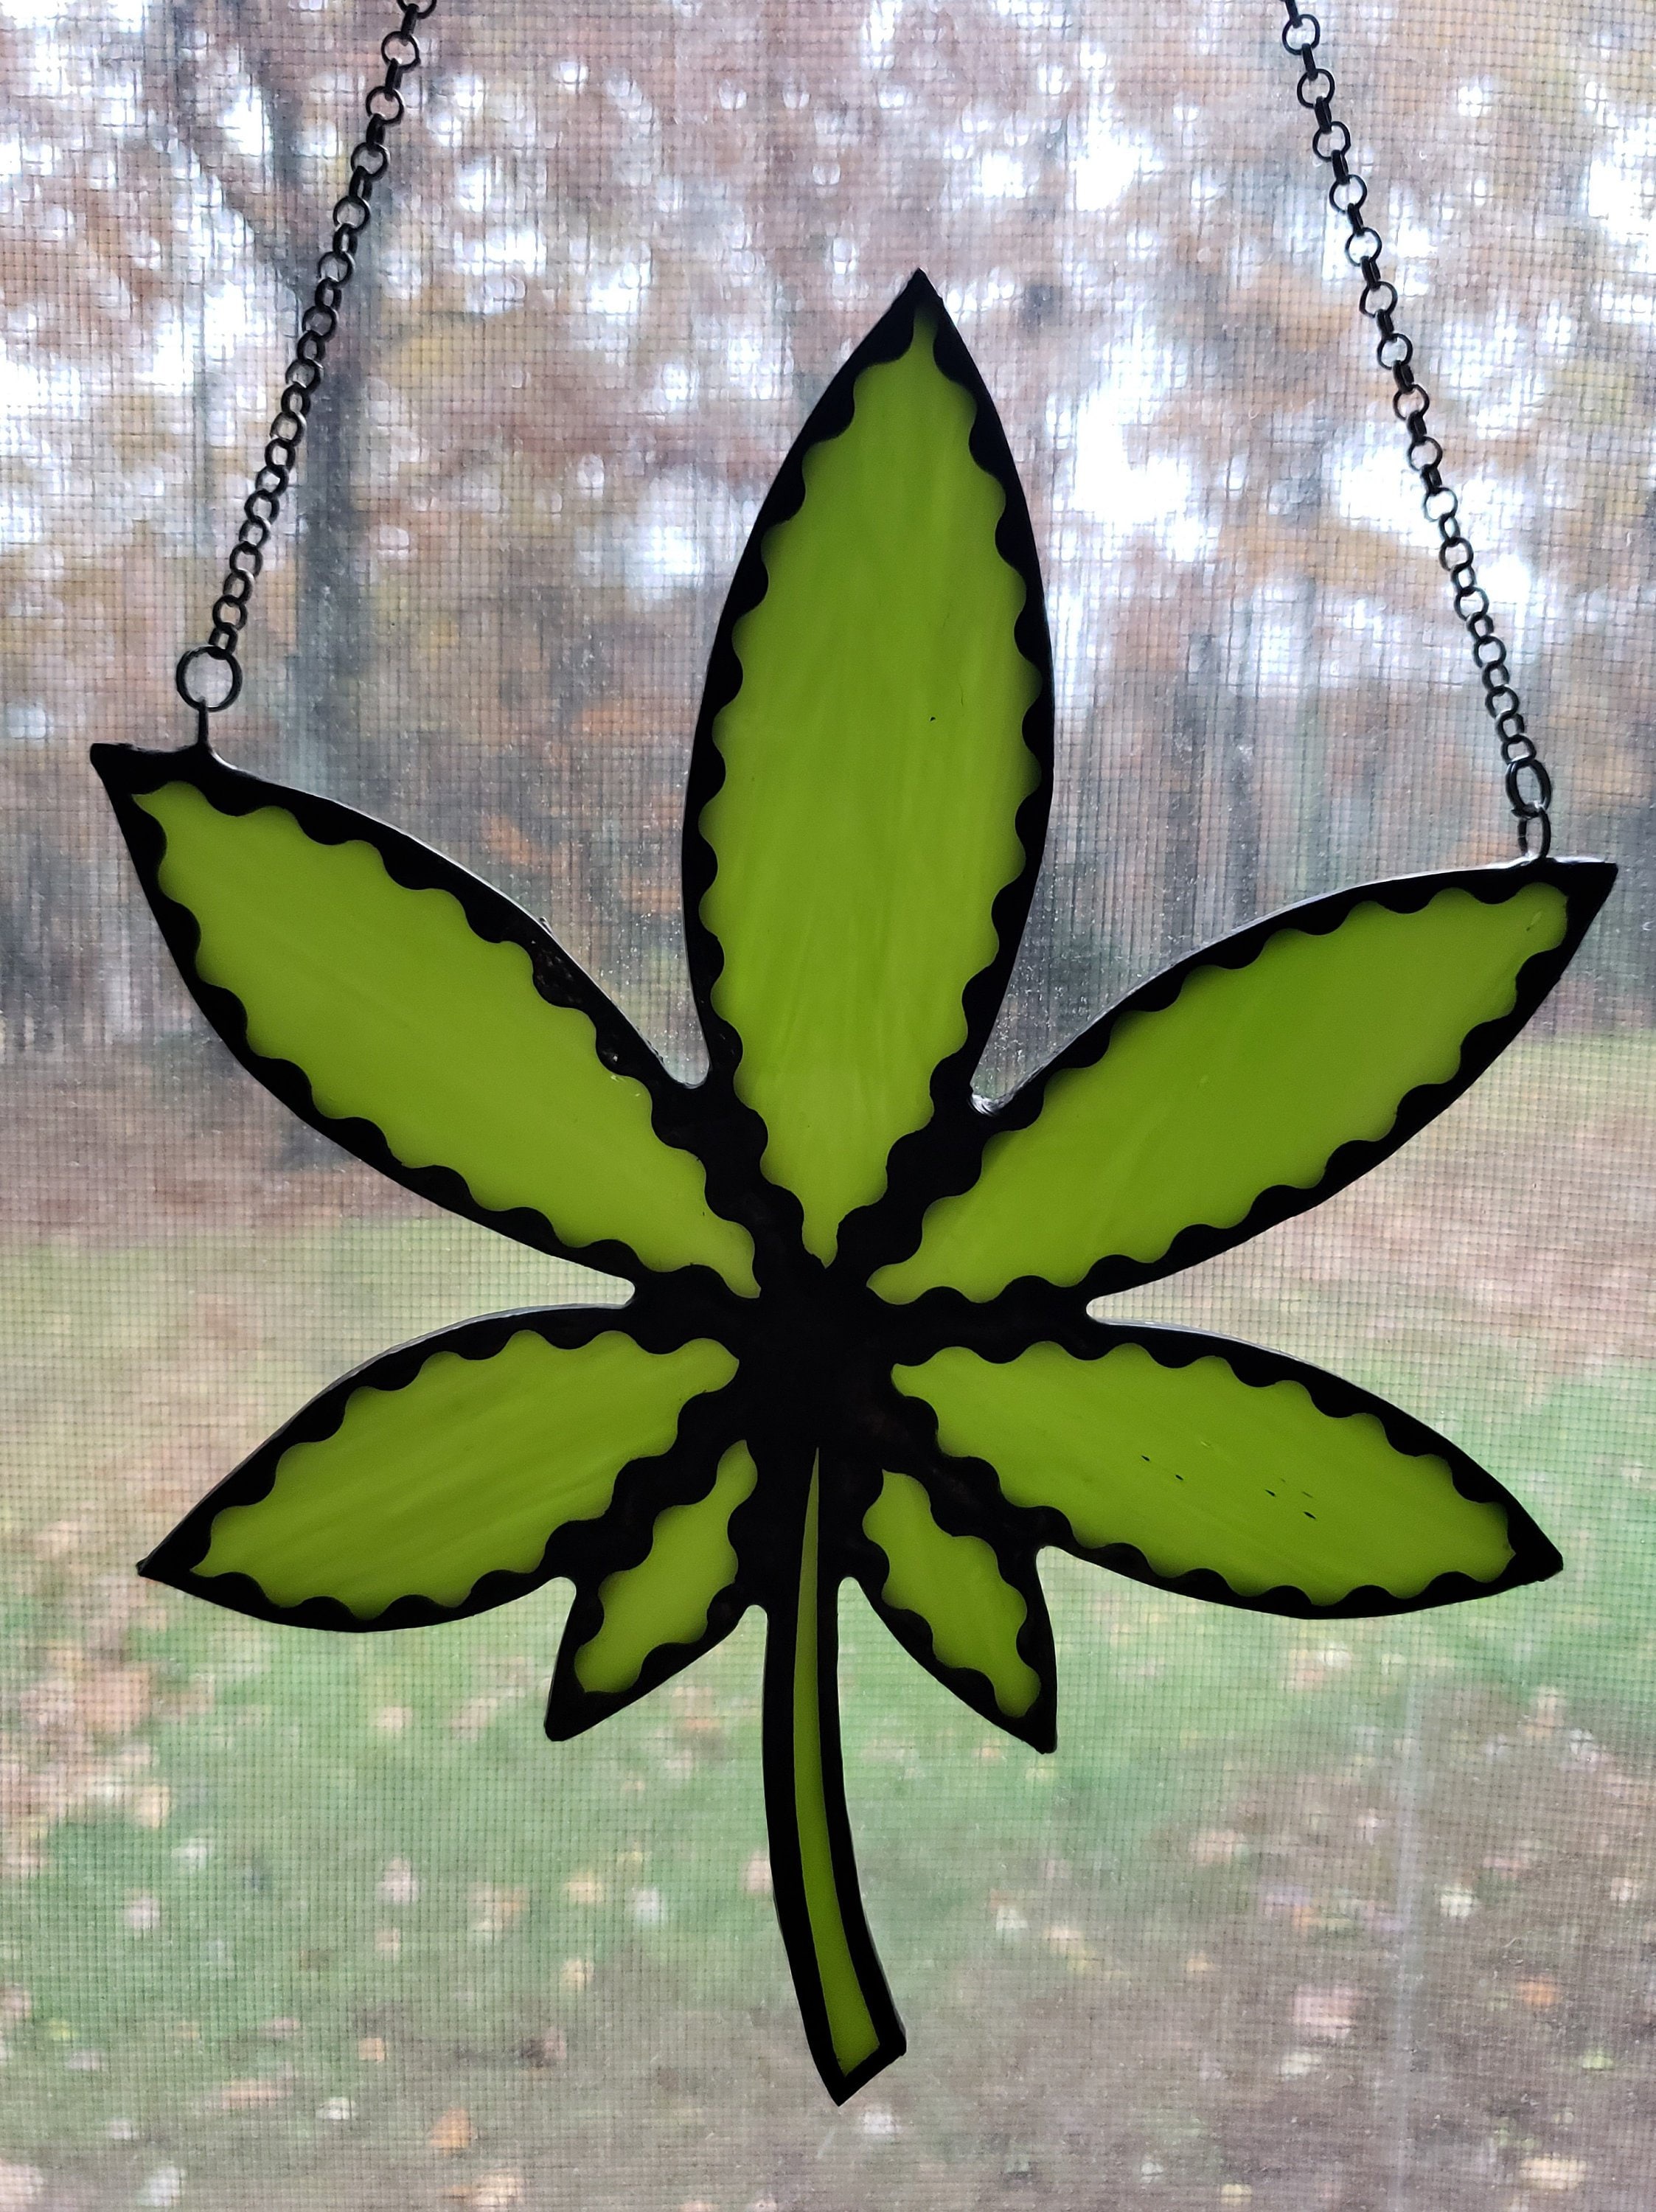 Hemp Leaf Unique Stained Glass Cannabis Art Window Ornament Etsy